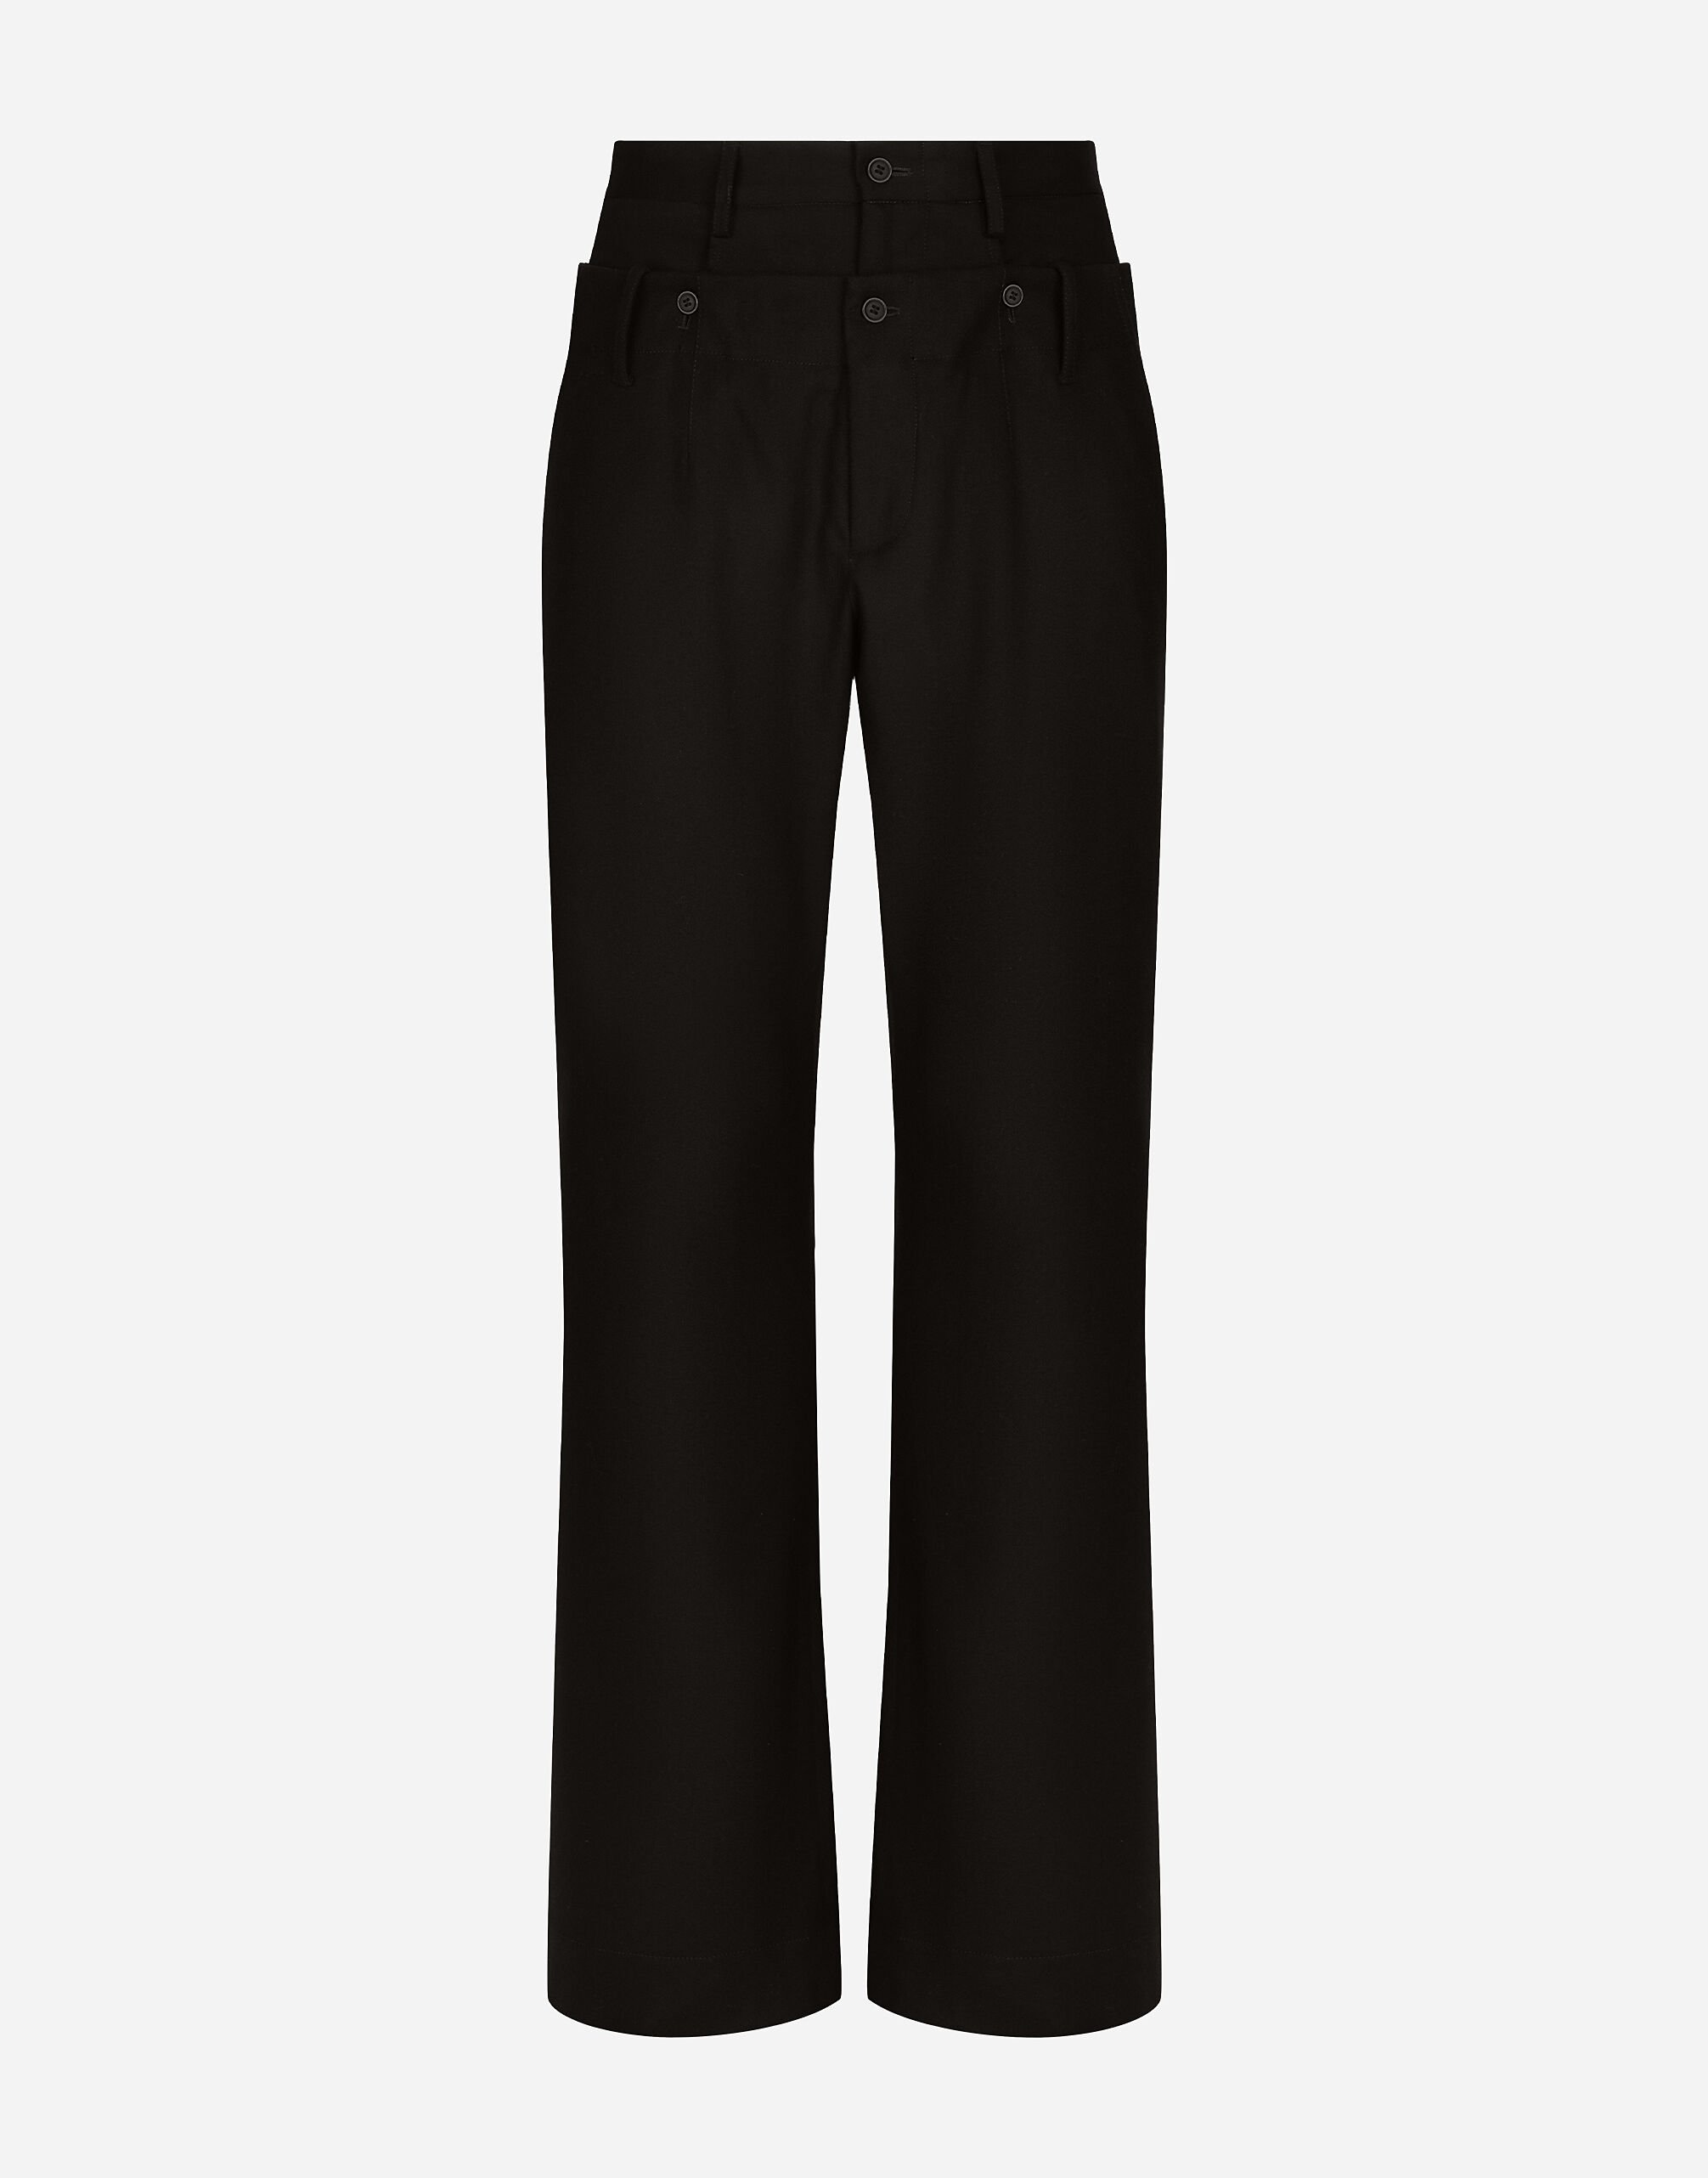 Dolce&Gabbana Stretch wool pants with double belt Multicolor G2QU4TFRMD4